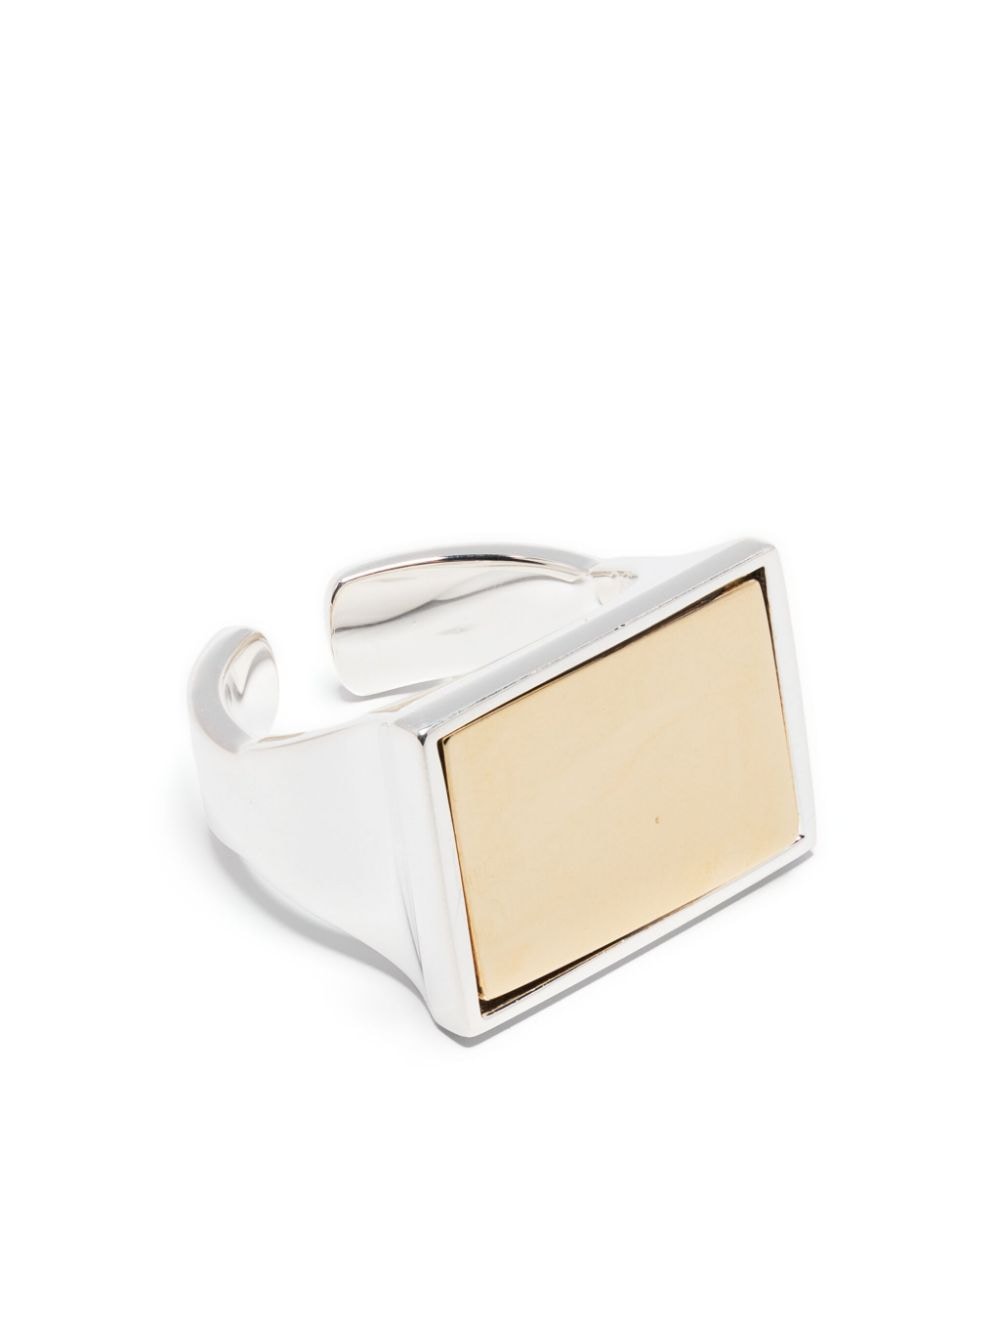 ISABEL MARANT To Dance gold-plated ring - Silver von ISABEL MARANT